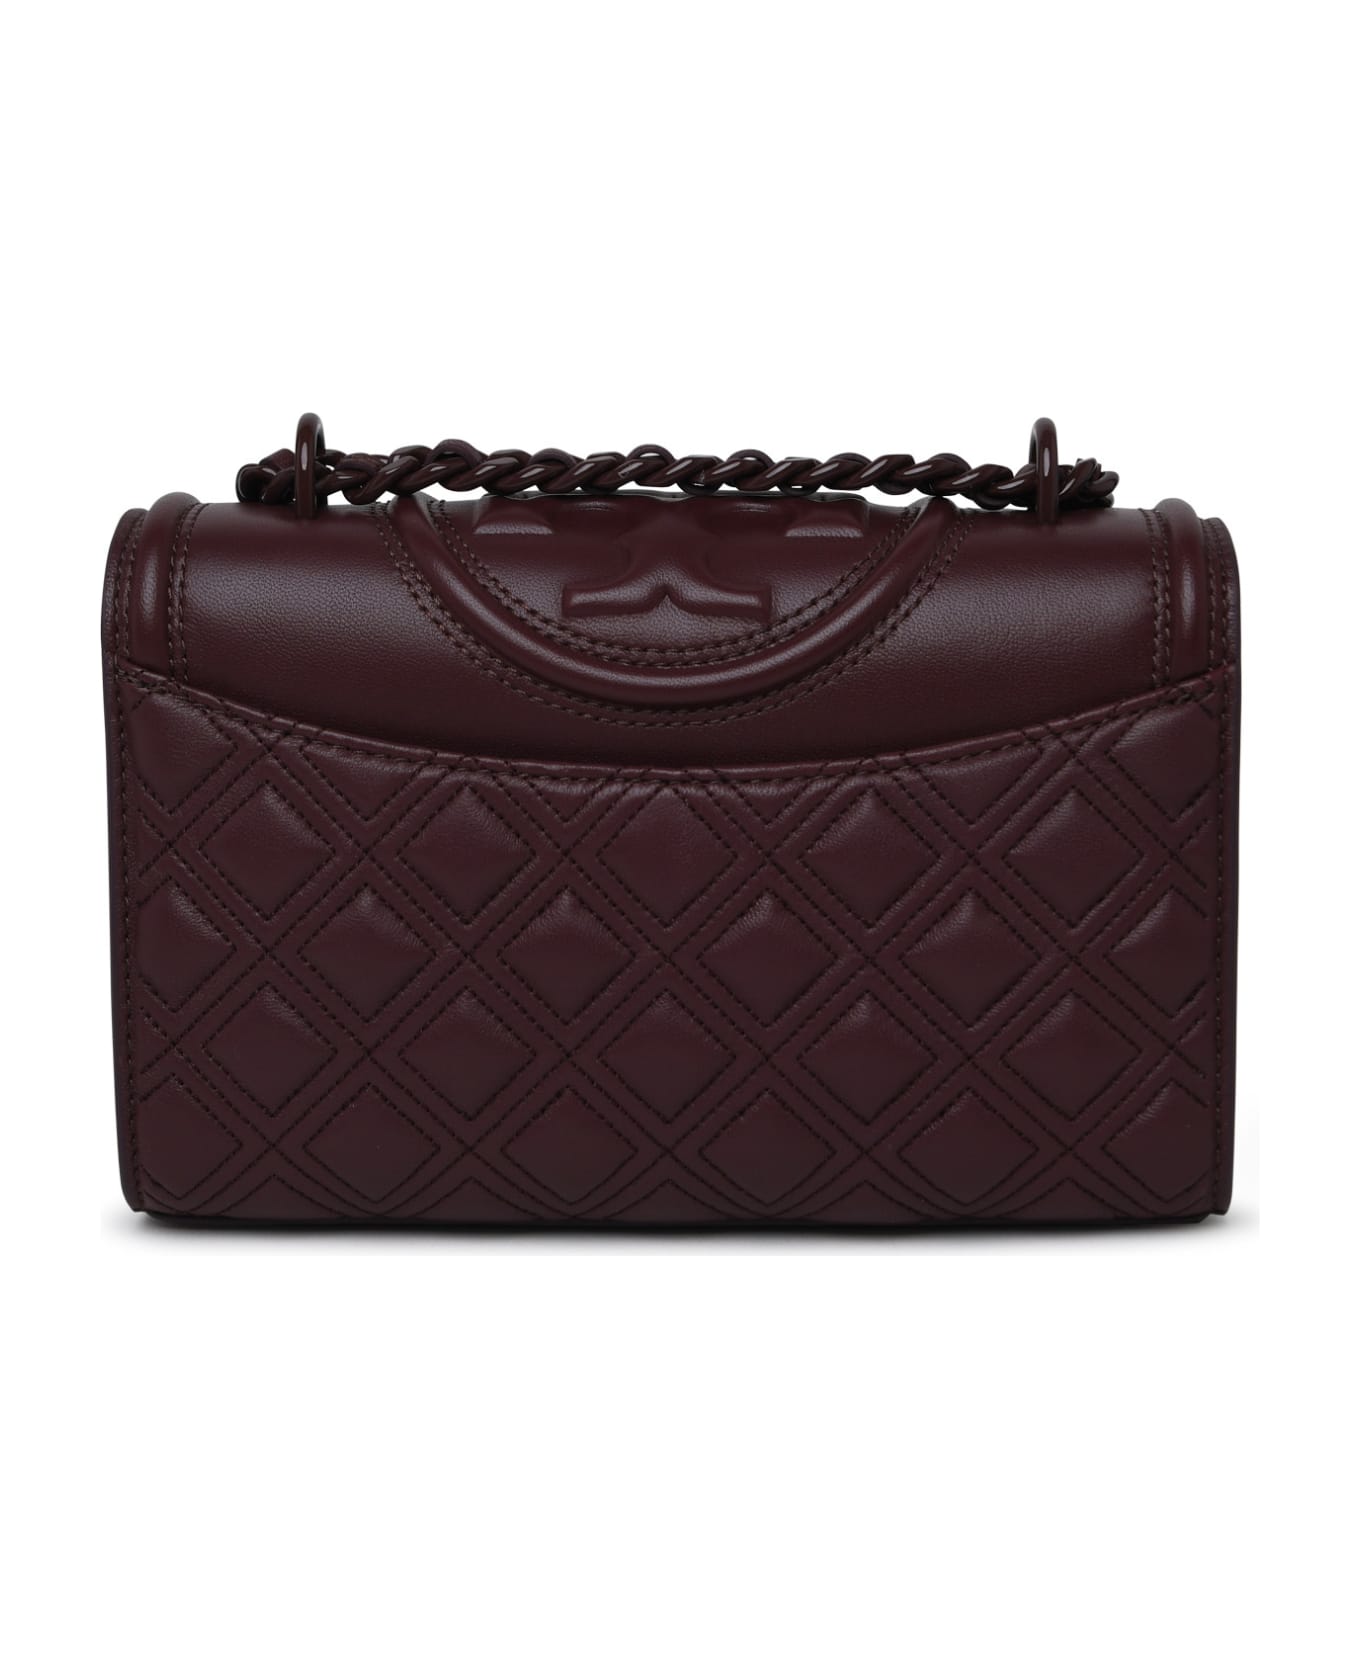 Tory Burch Fleming Leather Shoulder Bag - MUSCADINE